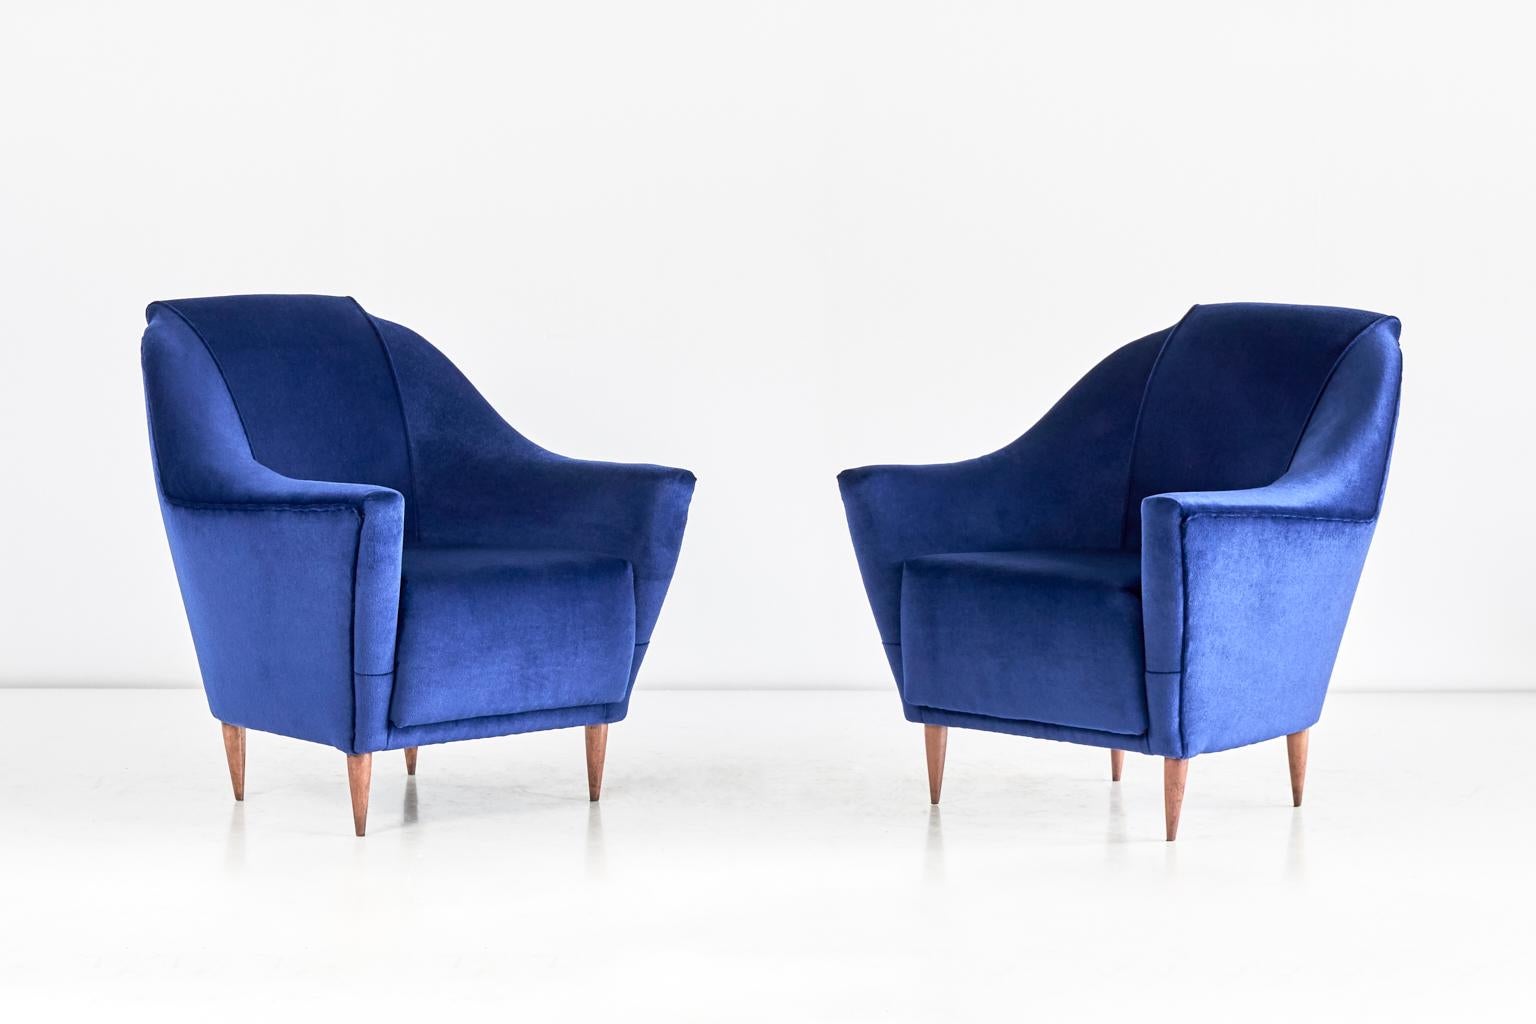 Pair of Ico Parisi Armchairs in Blue Velvet for Ariberto Colombo, Italy, 1951 In Good Condition For Sale In The Hague, NL